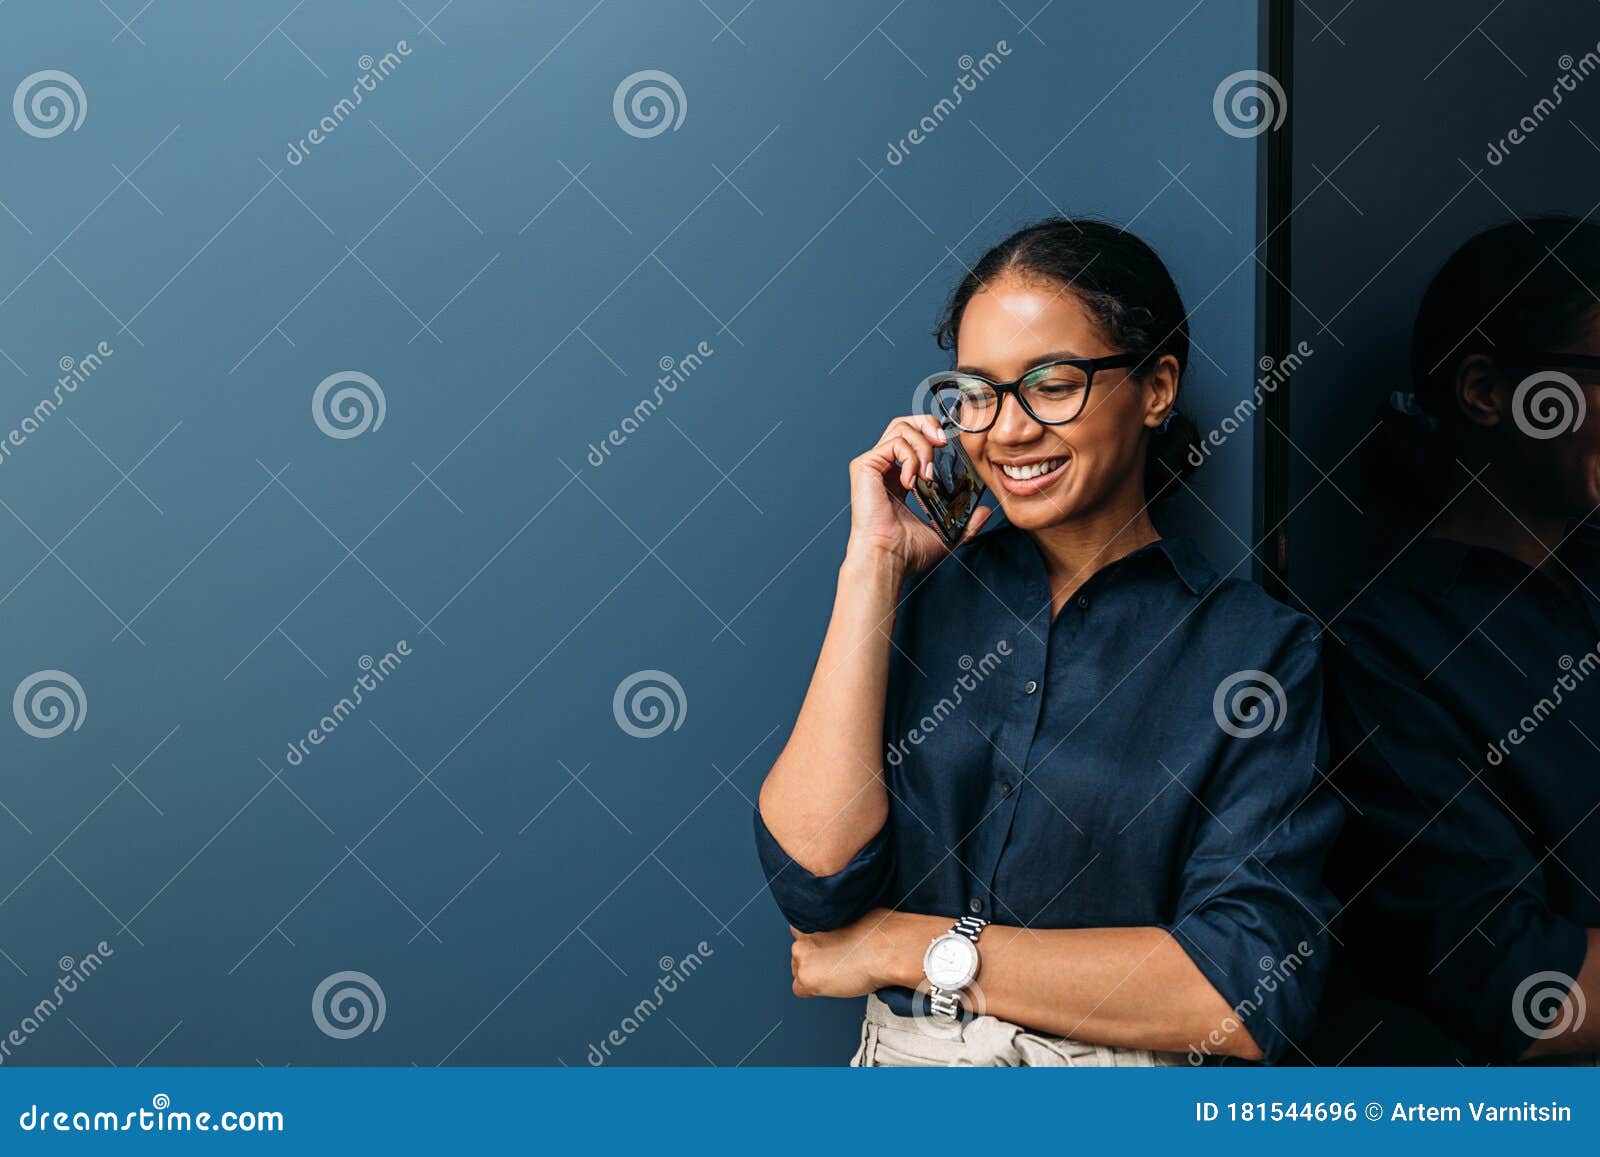 Smiling Woman Making Phone Call from Home Stock Photo - Image of ...